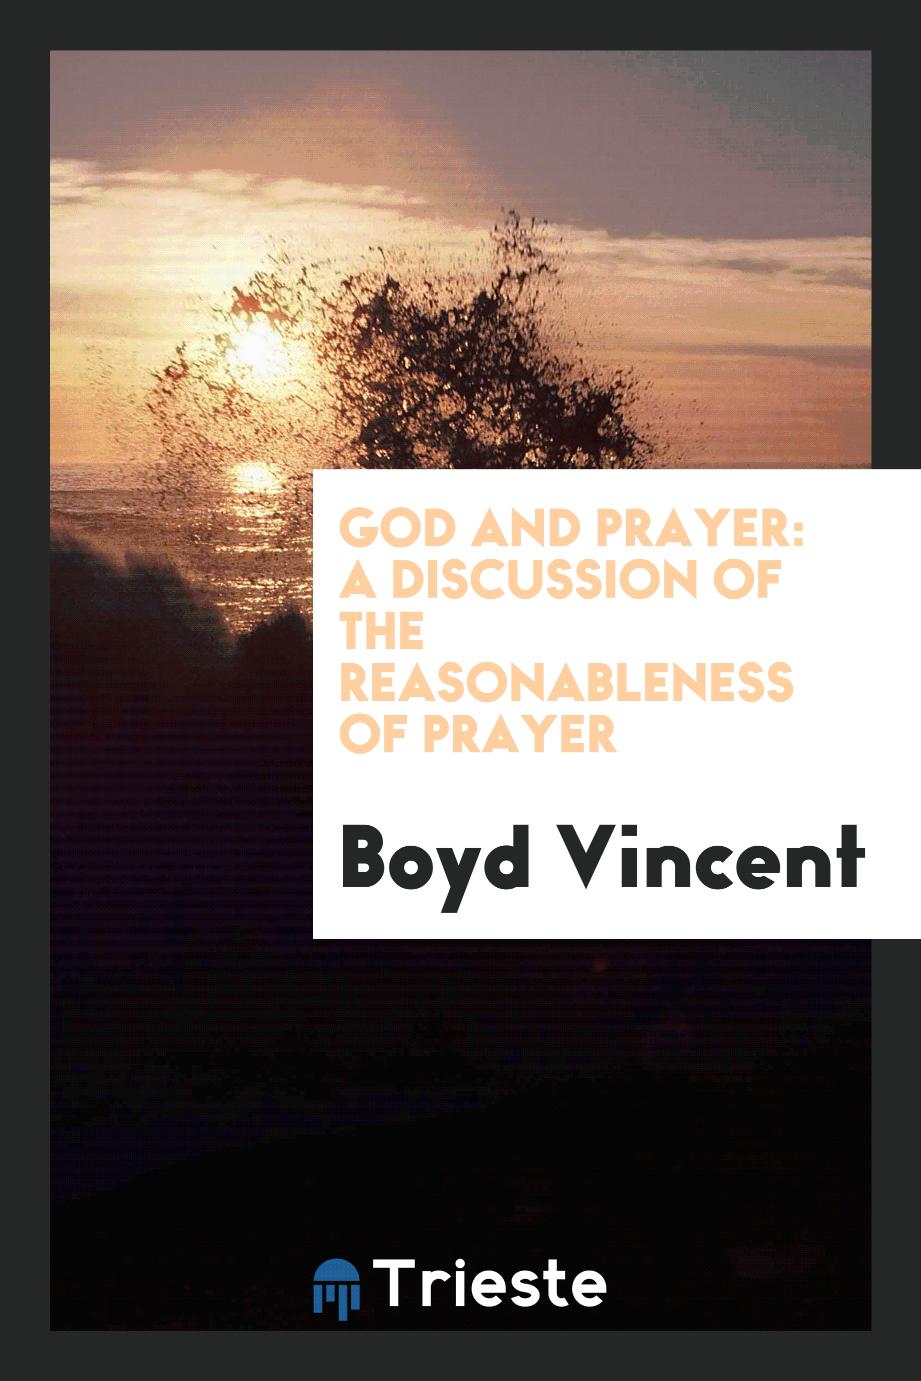 God and prayer: a discussion of the reasonableness of prayer